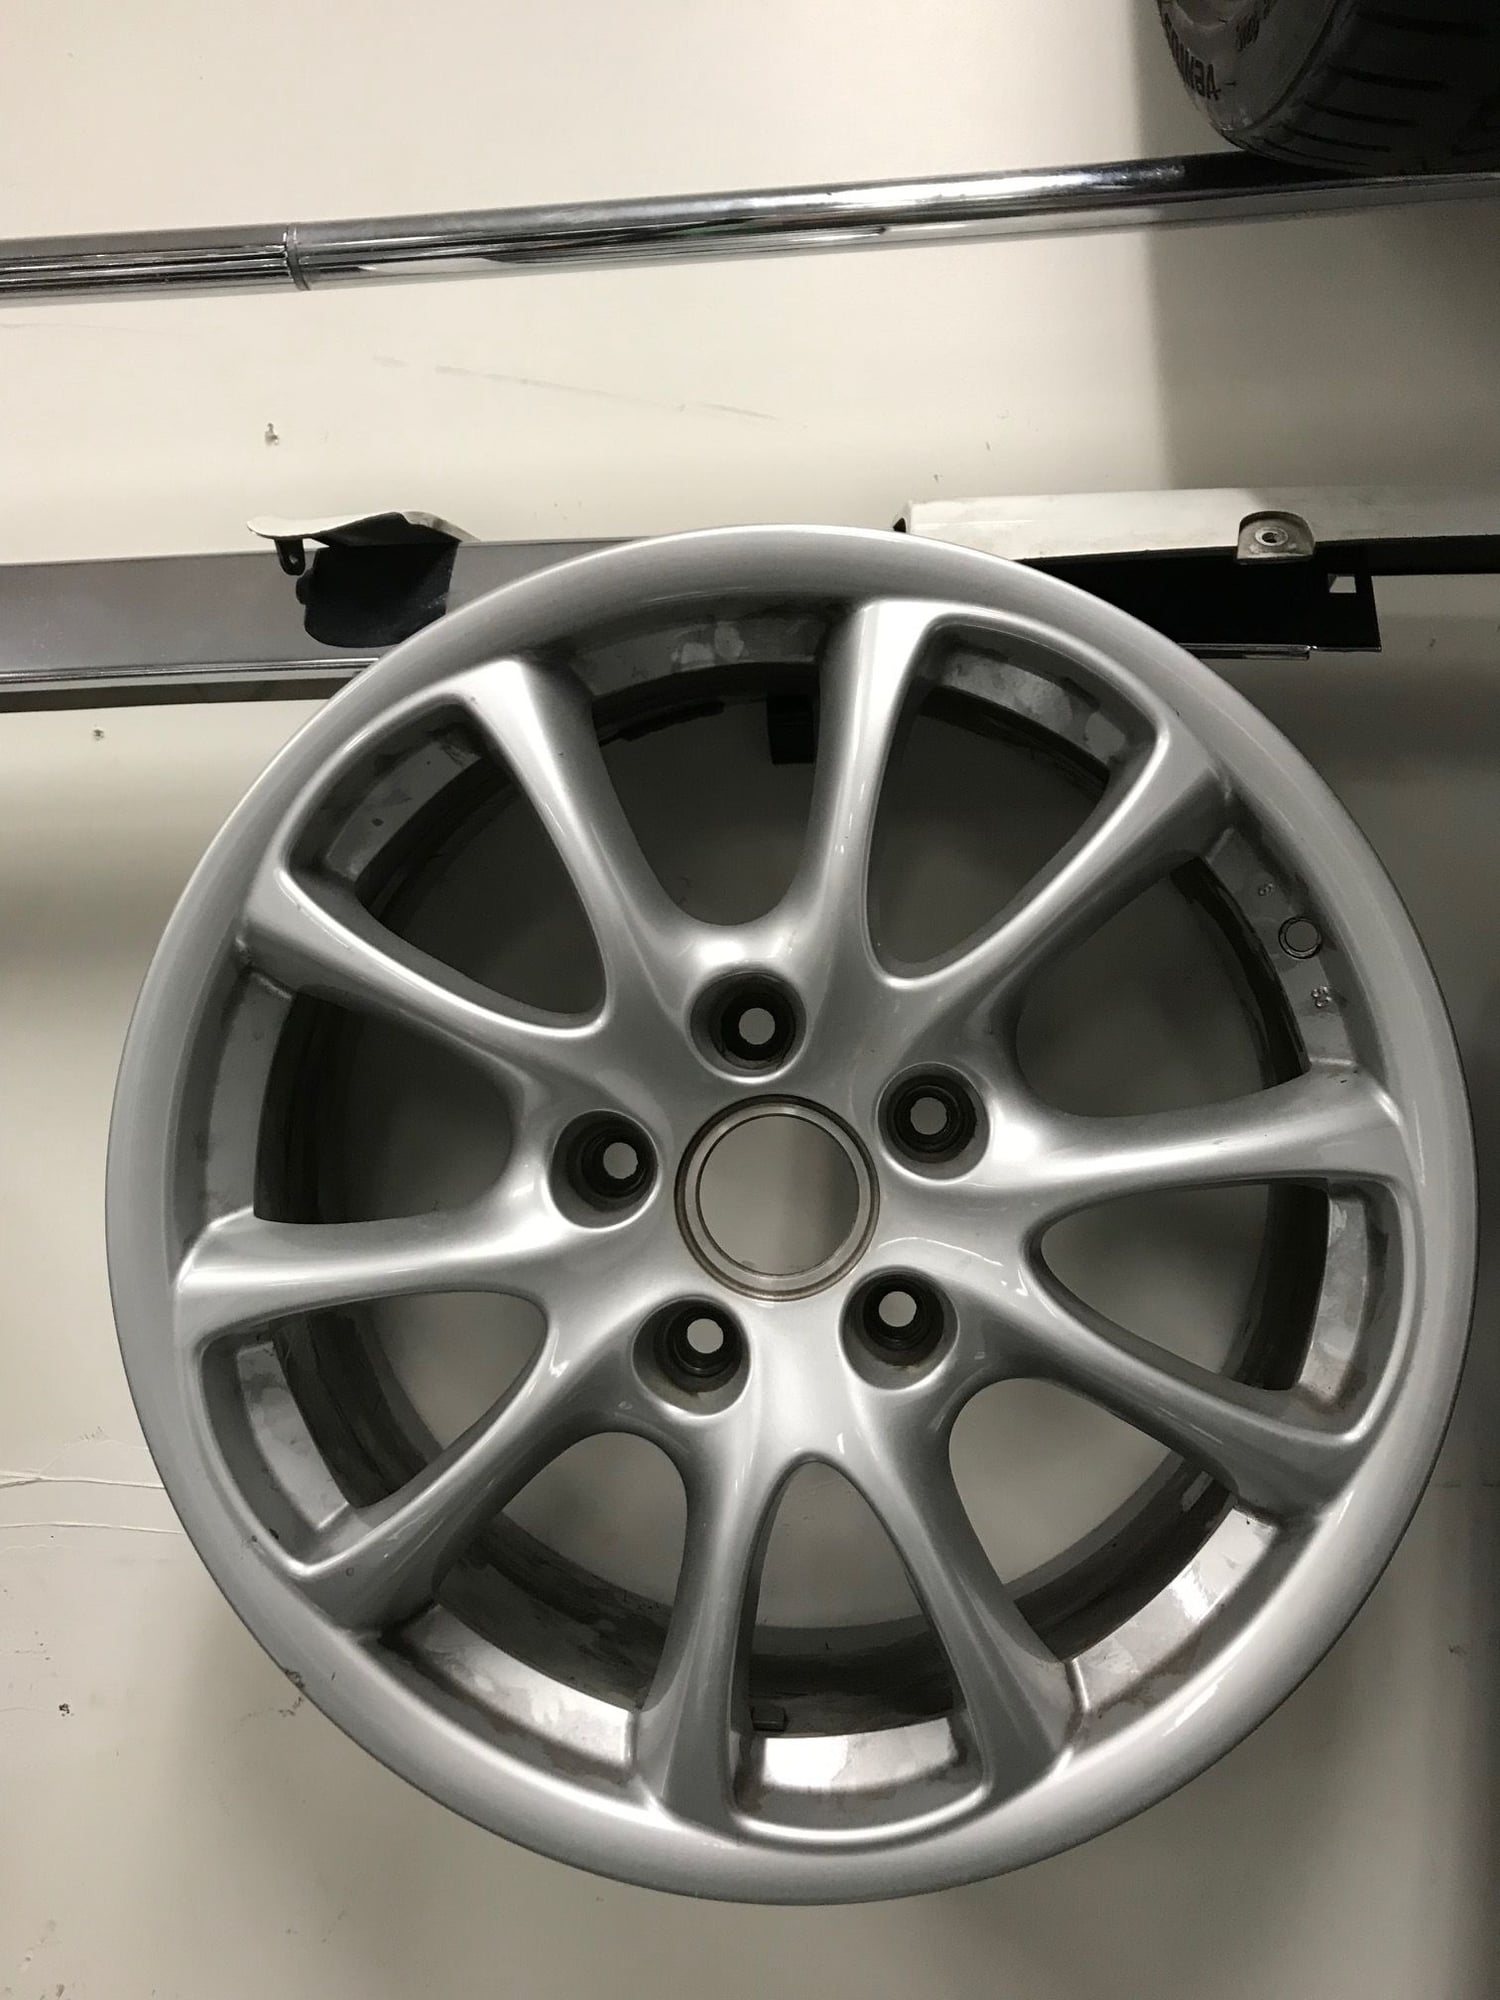 Wheels and Tires/Axles - OEM 996 Turbo GT3 style wheels - Used - 2001 to 2005 Porsche 911 - Los Angeles, CA 90731, United States